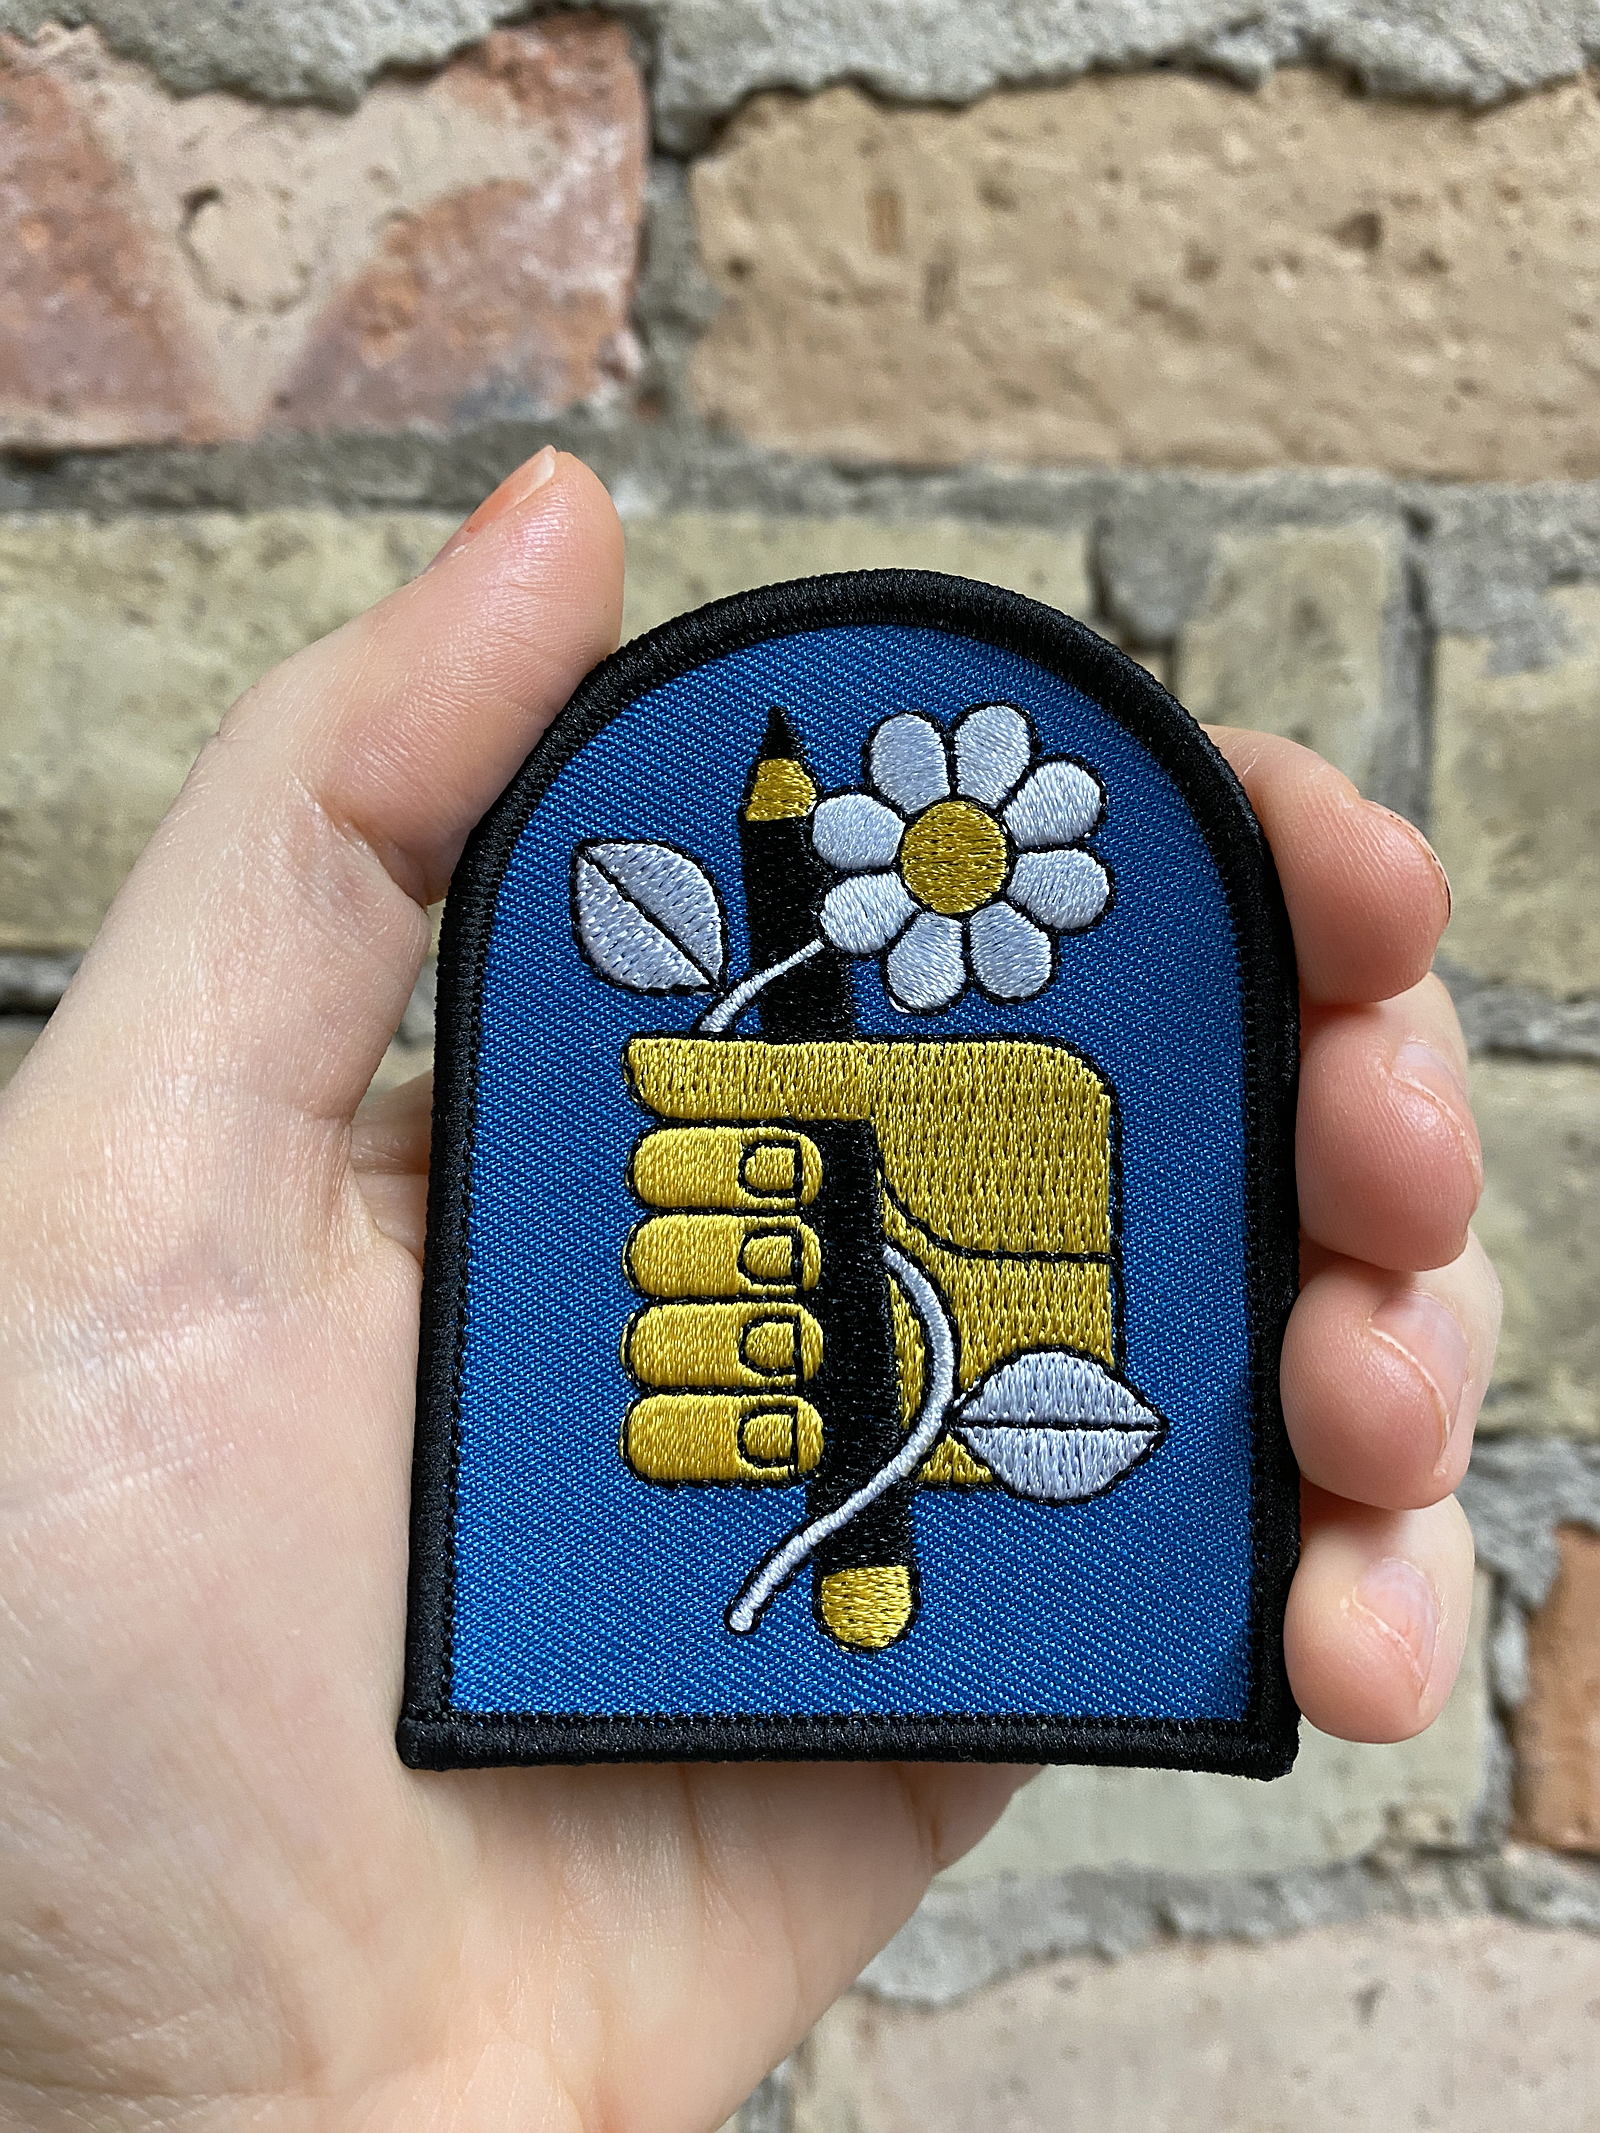 A patch of a yellow hand holding a black pencil and white flower, stitched in a bold graphic style. There is a blue background and black trim around the edge of the patch.